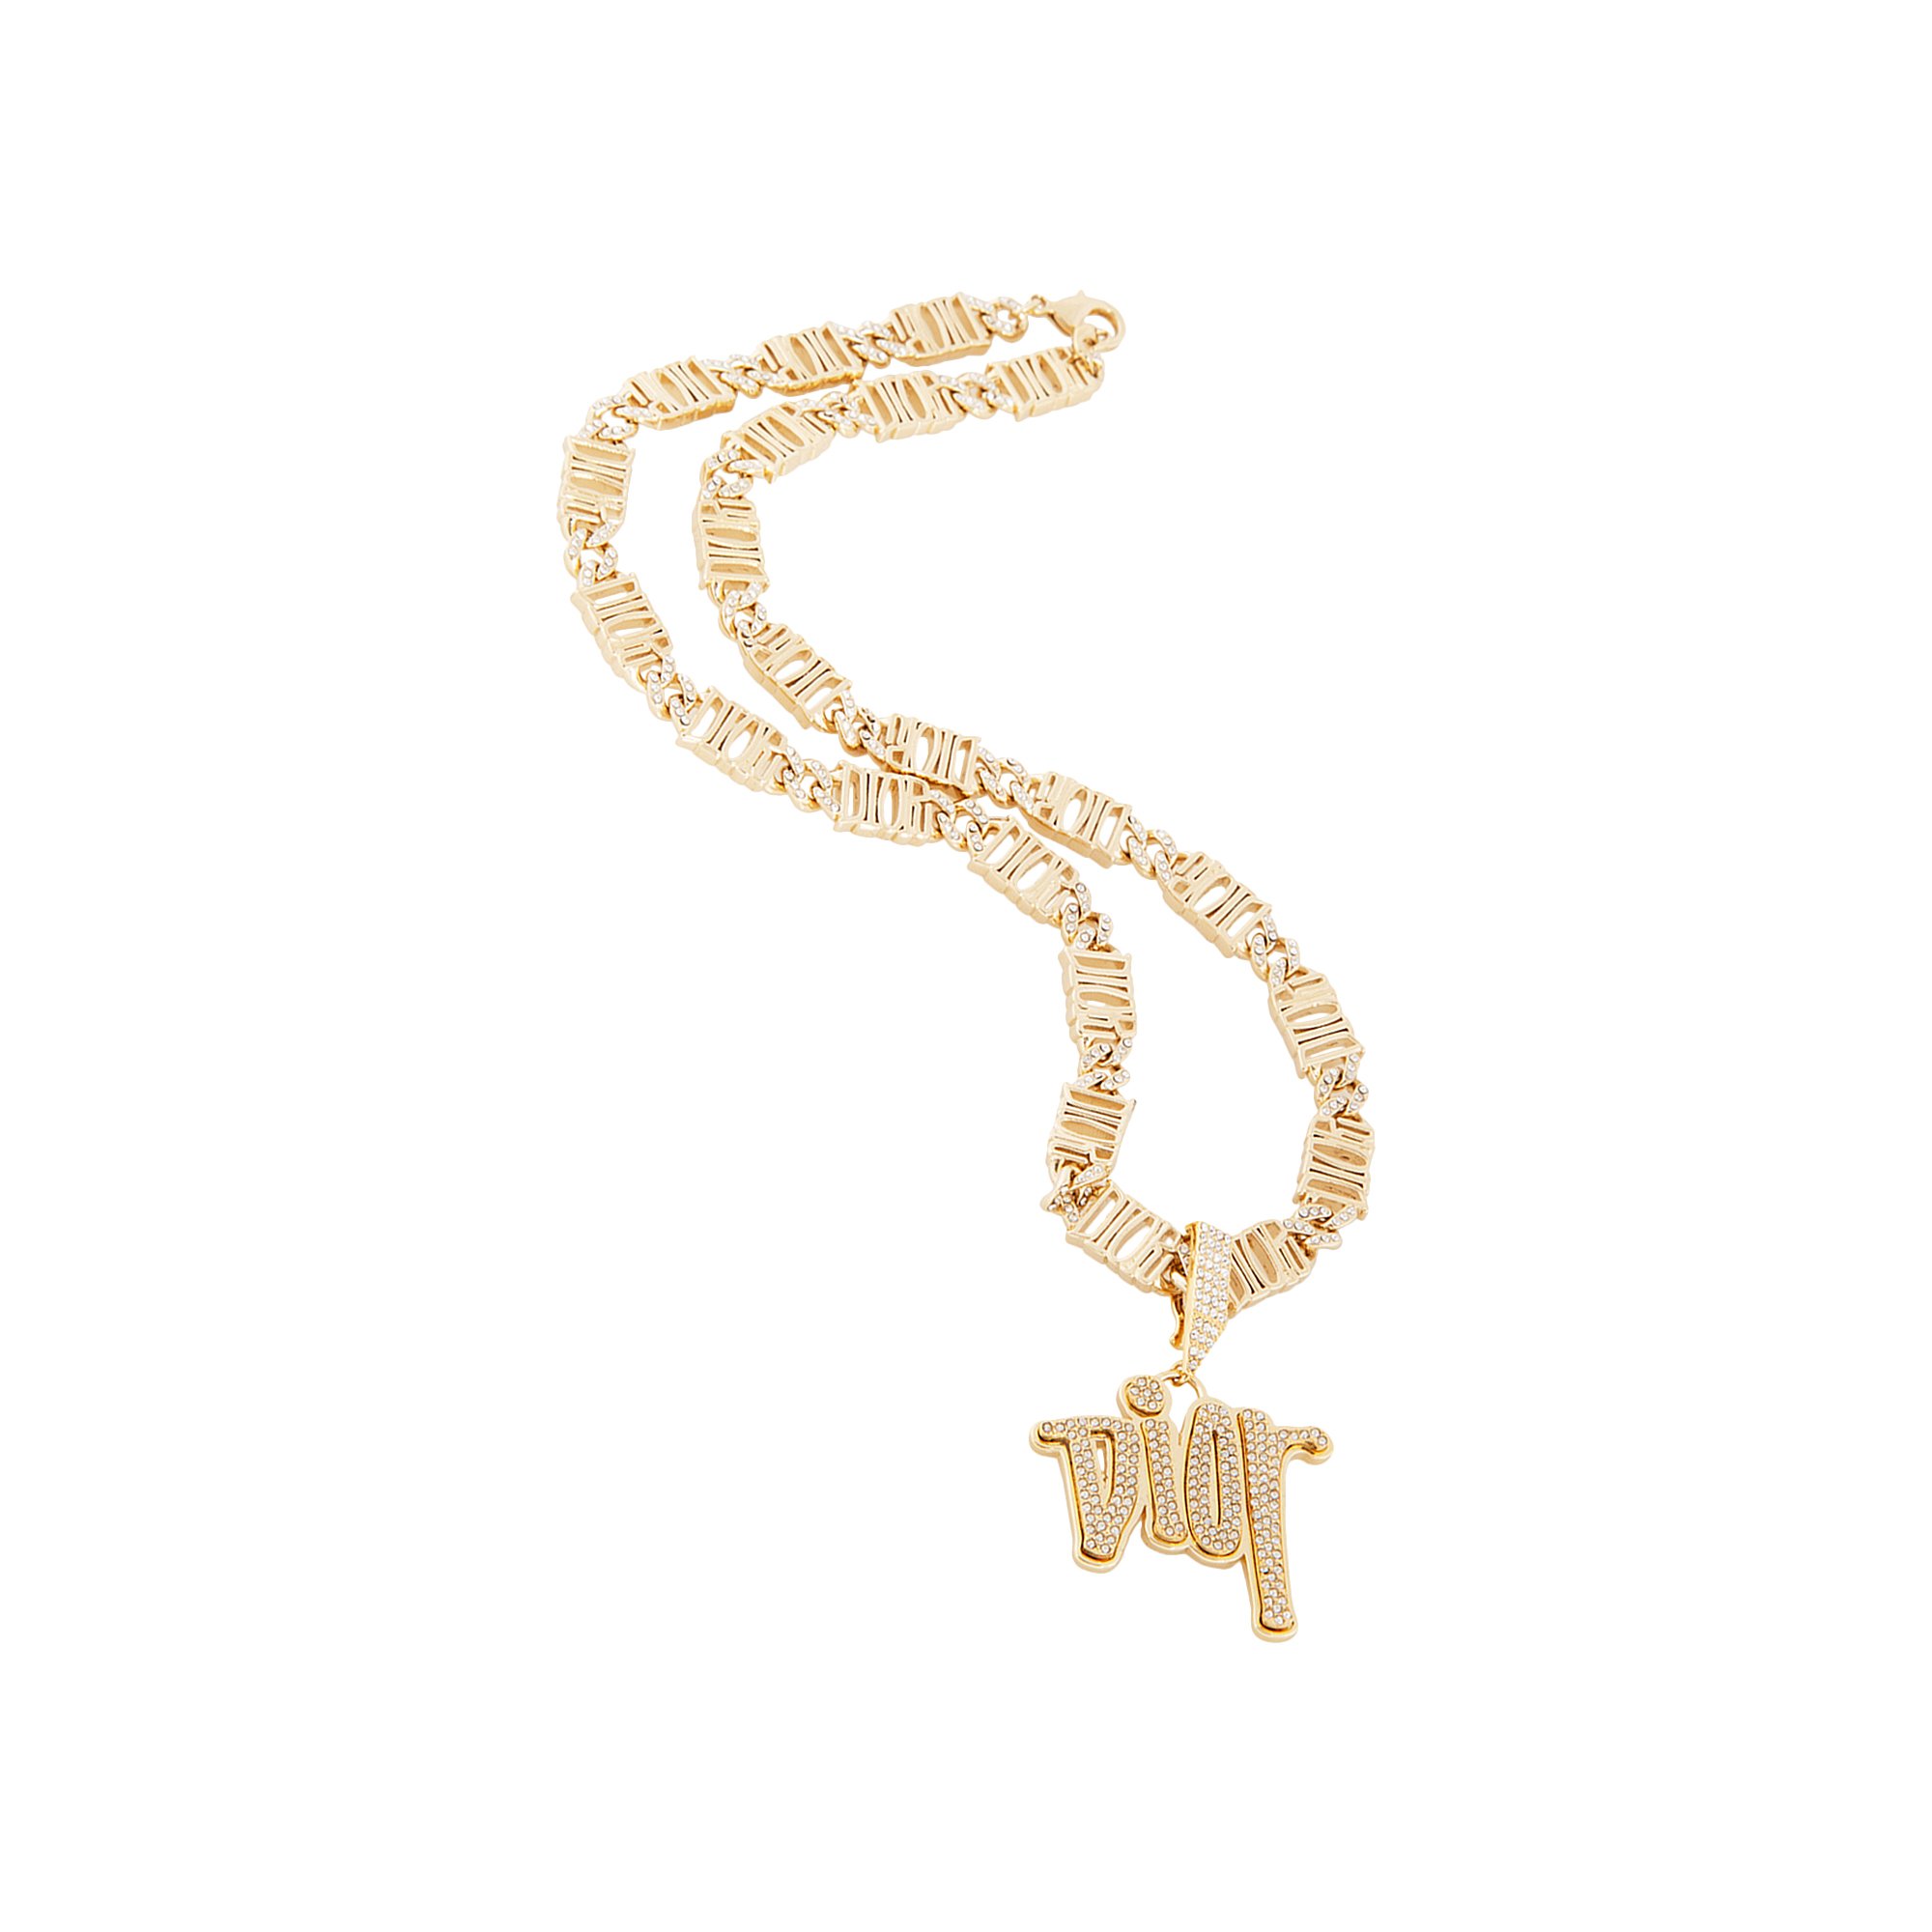 Buy Dior x Shawn Stussy Chainlink Necklace 'Gold' - N1180H0MMT 